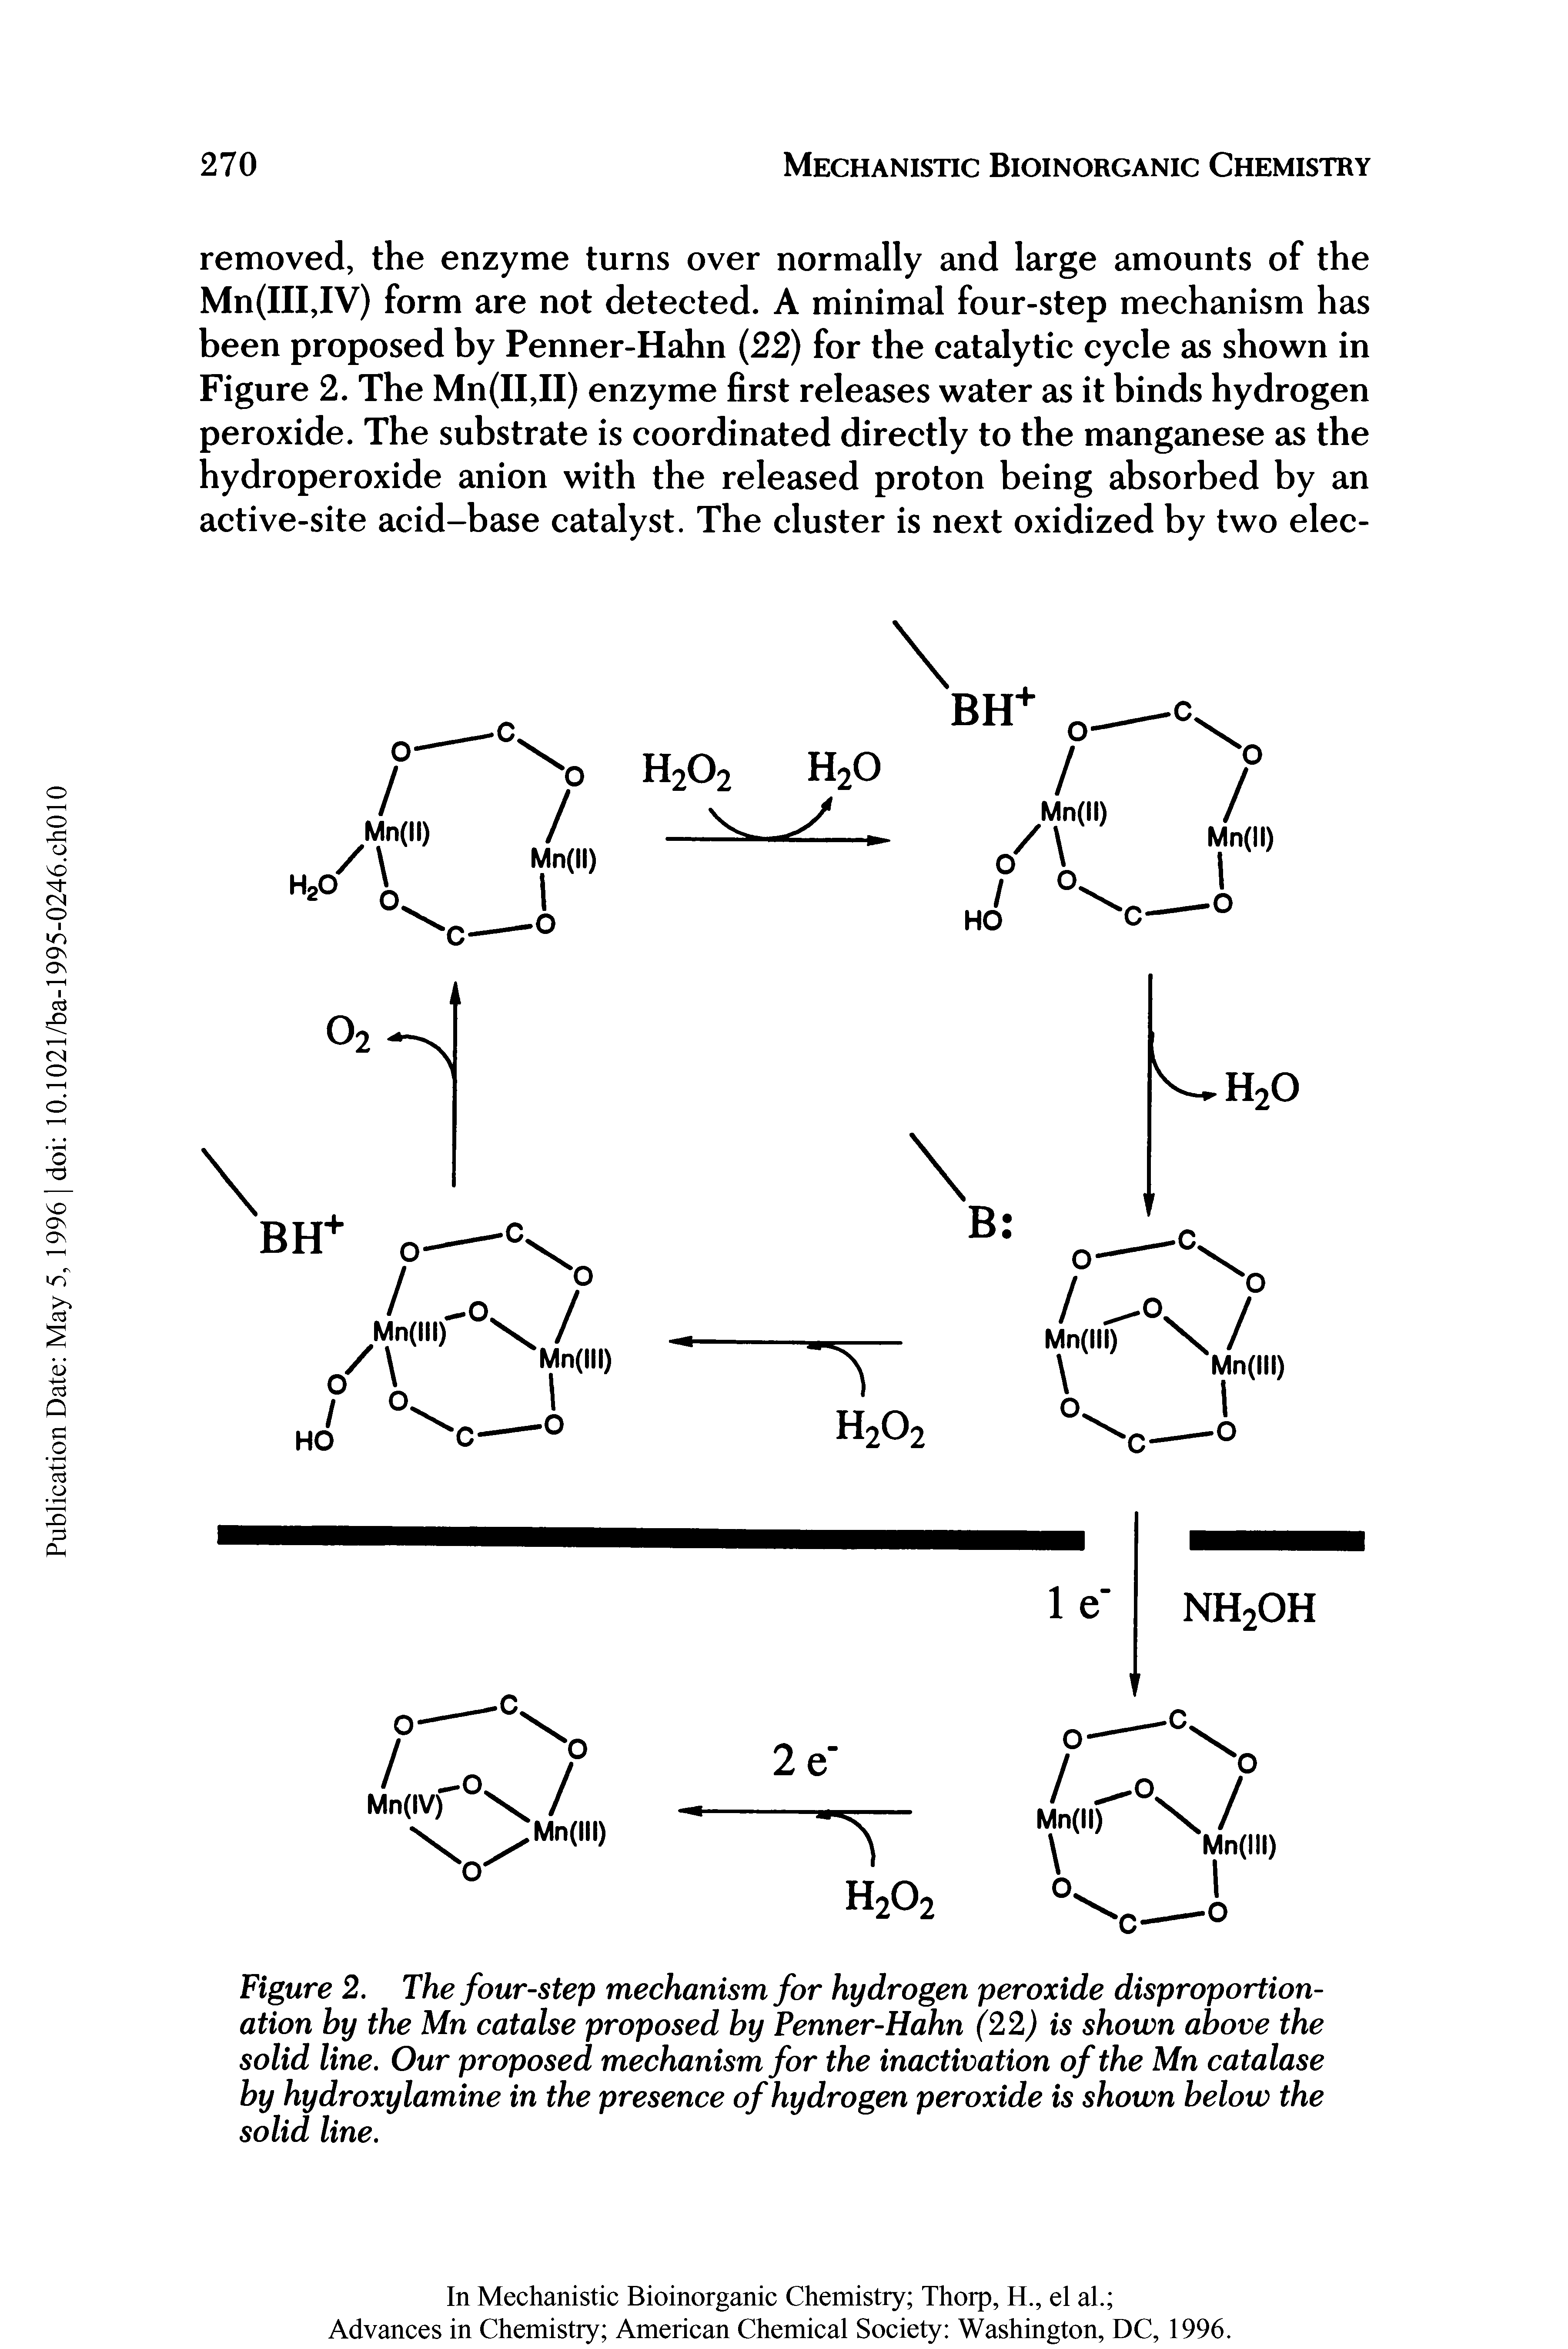 Figure 2. The four-step mechanism for hydrogen peroxide disproportionation by the Mn catalse proposed by Penner-Hahn (22) is shown above the solid line. Our proposed mechanism for the inactivation of the Mn catalase by hydroxylamine in the presence of hydrogen peroxide is shown below the solid line.